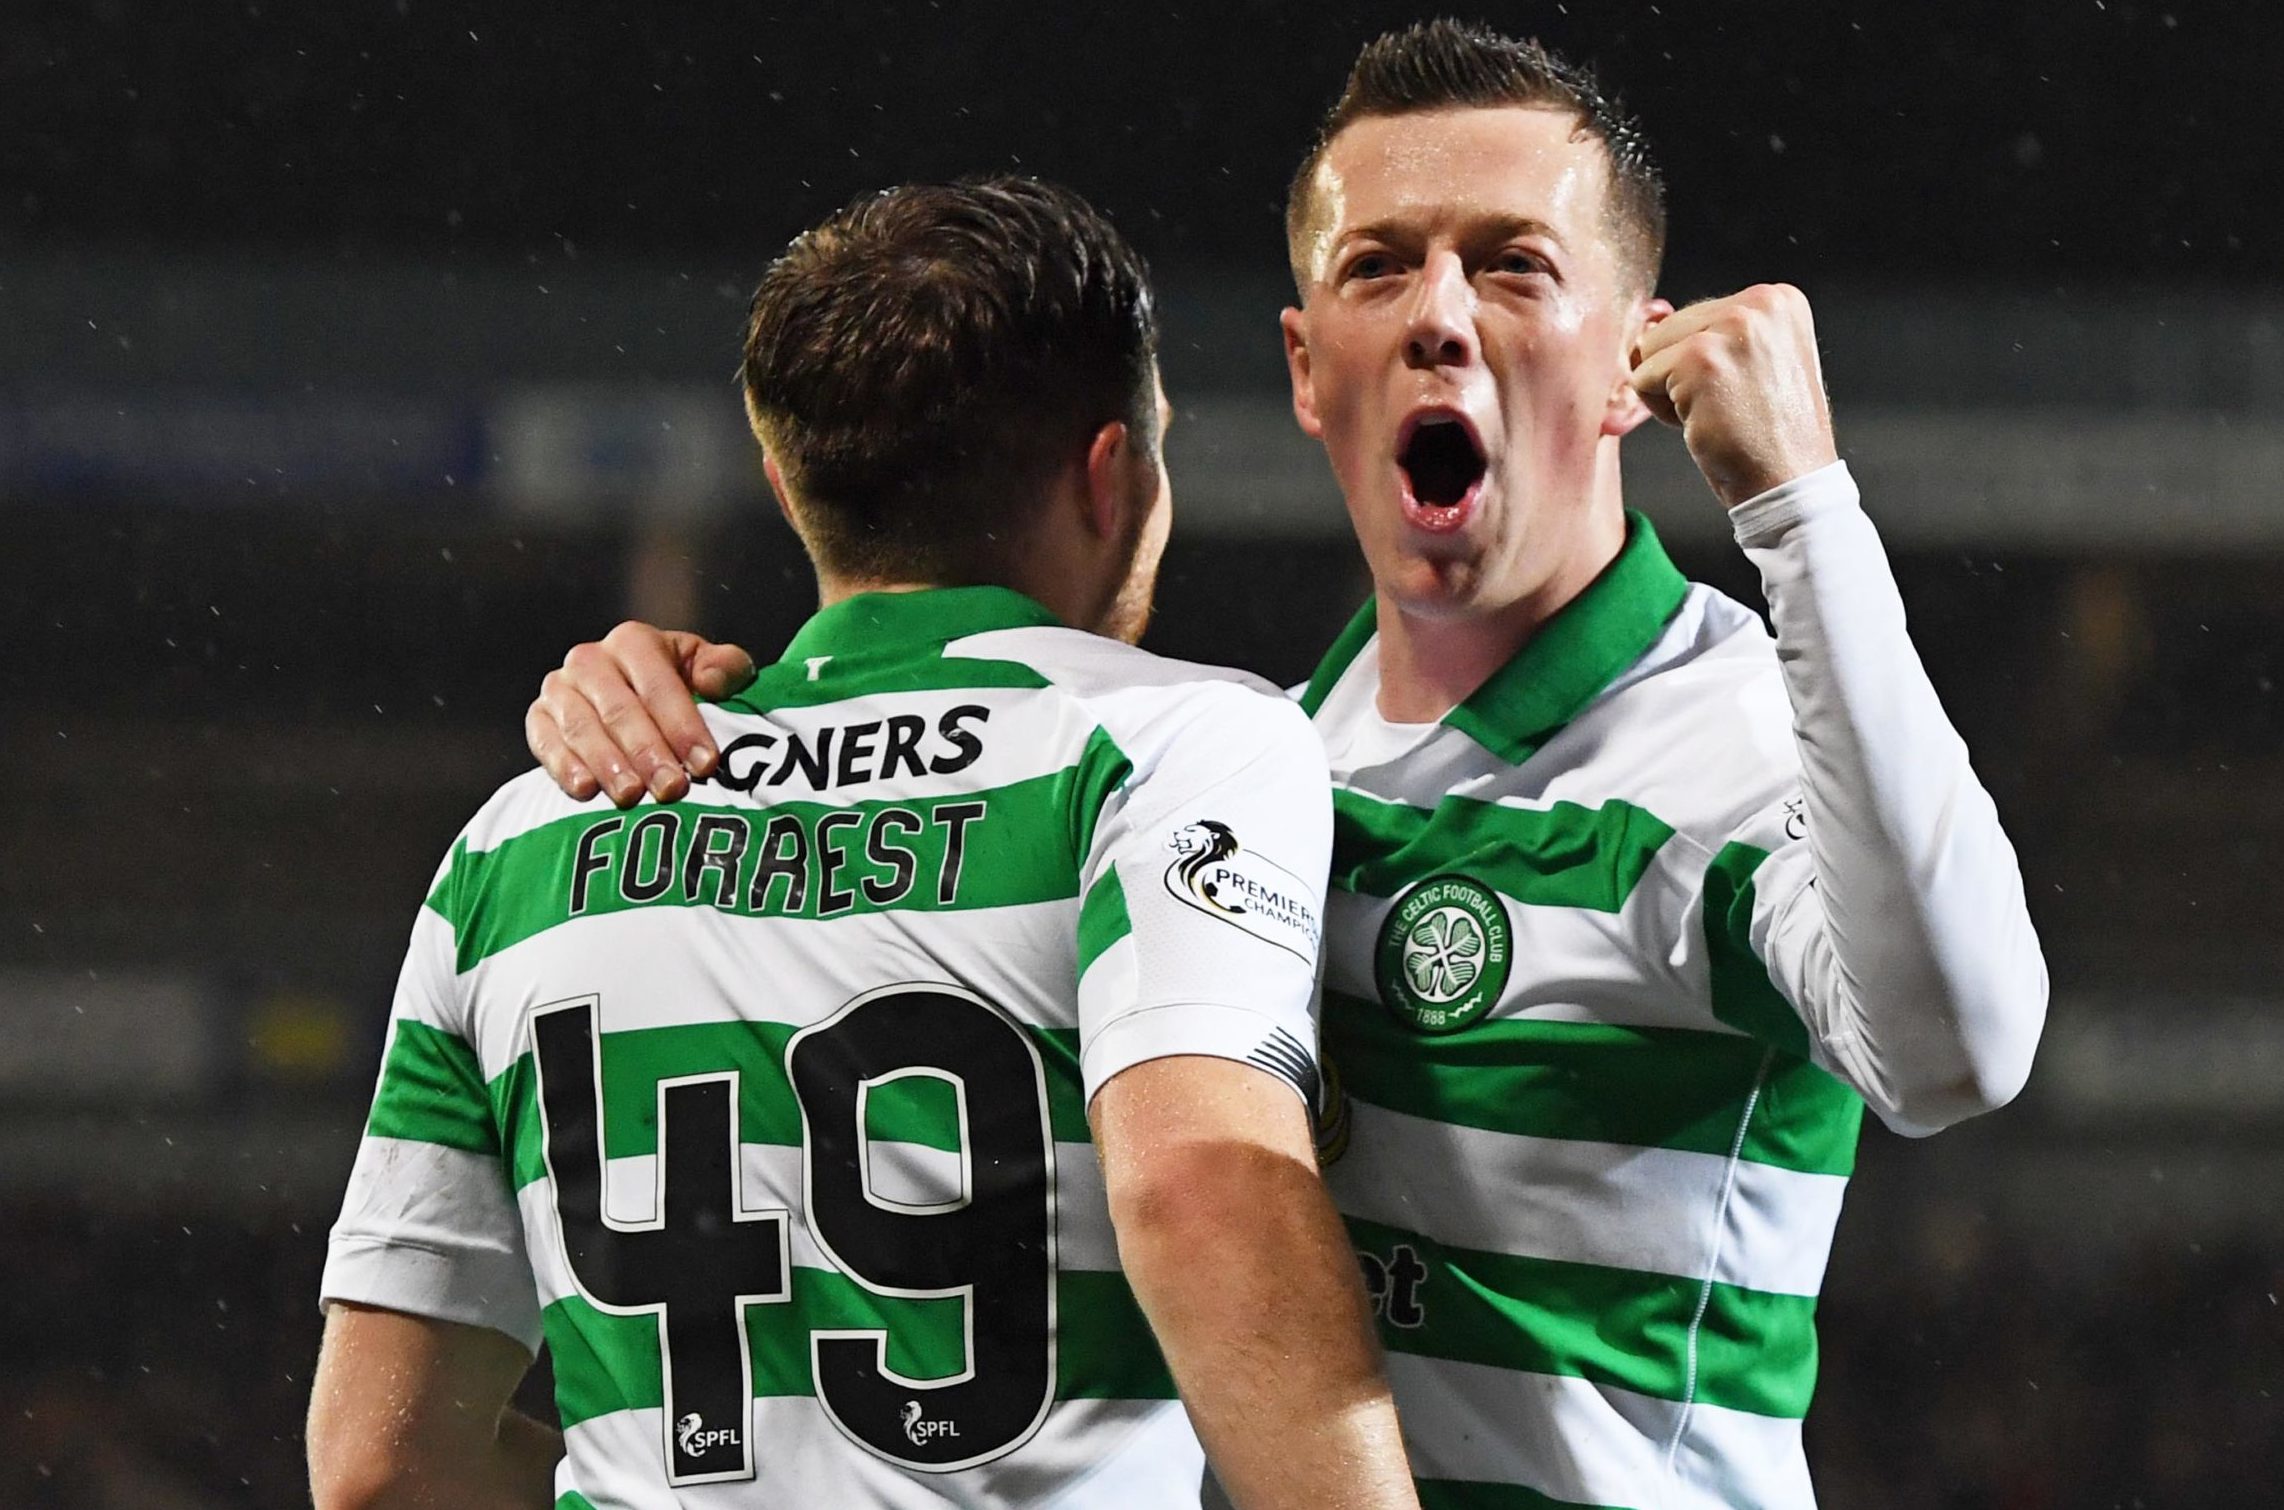 Celtic midfielder Callum McGregor is a hugely important player for the Hoops